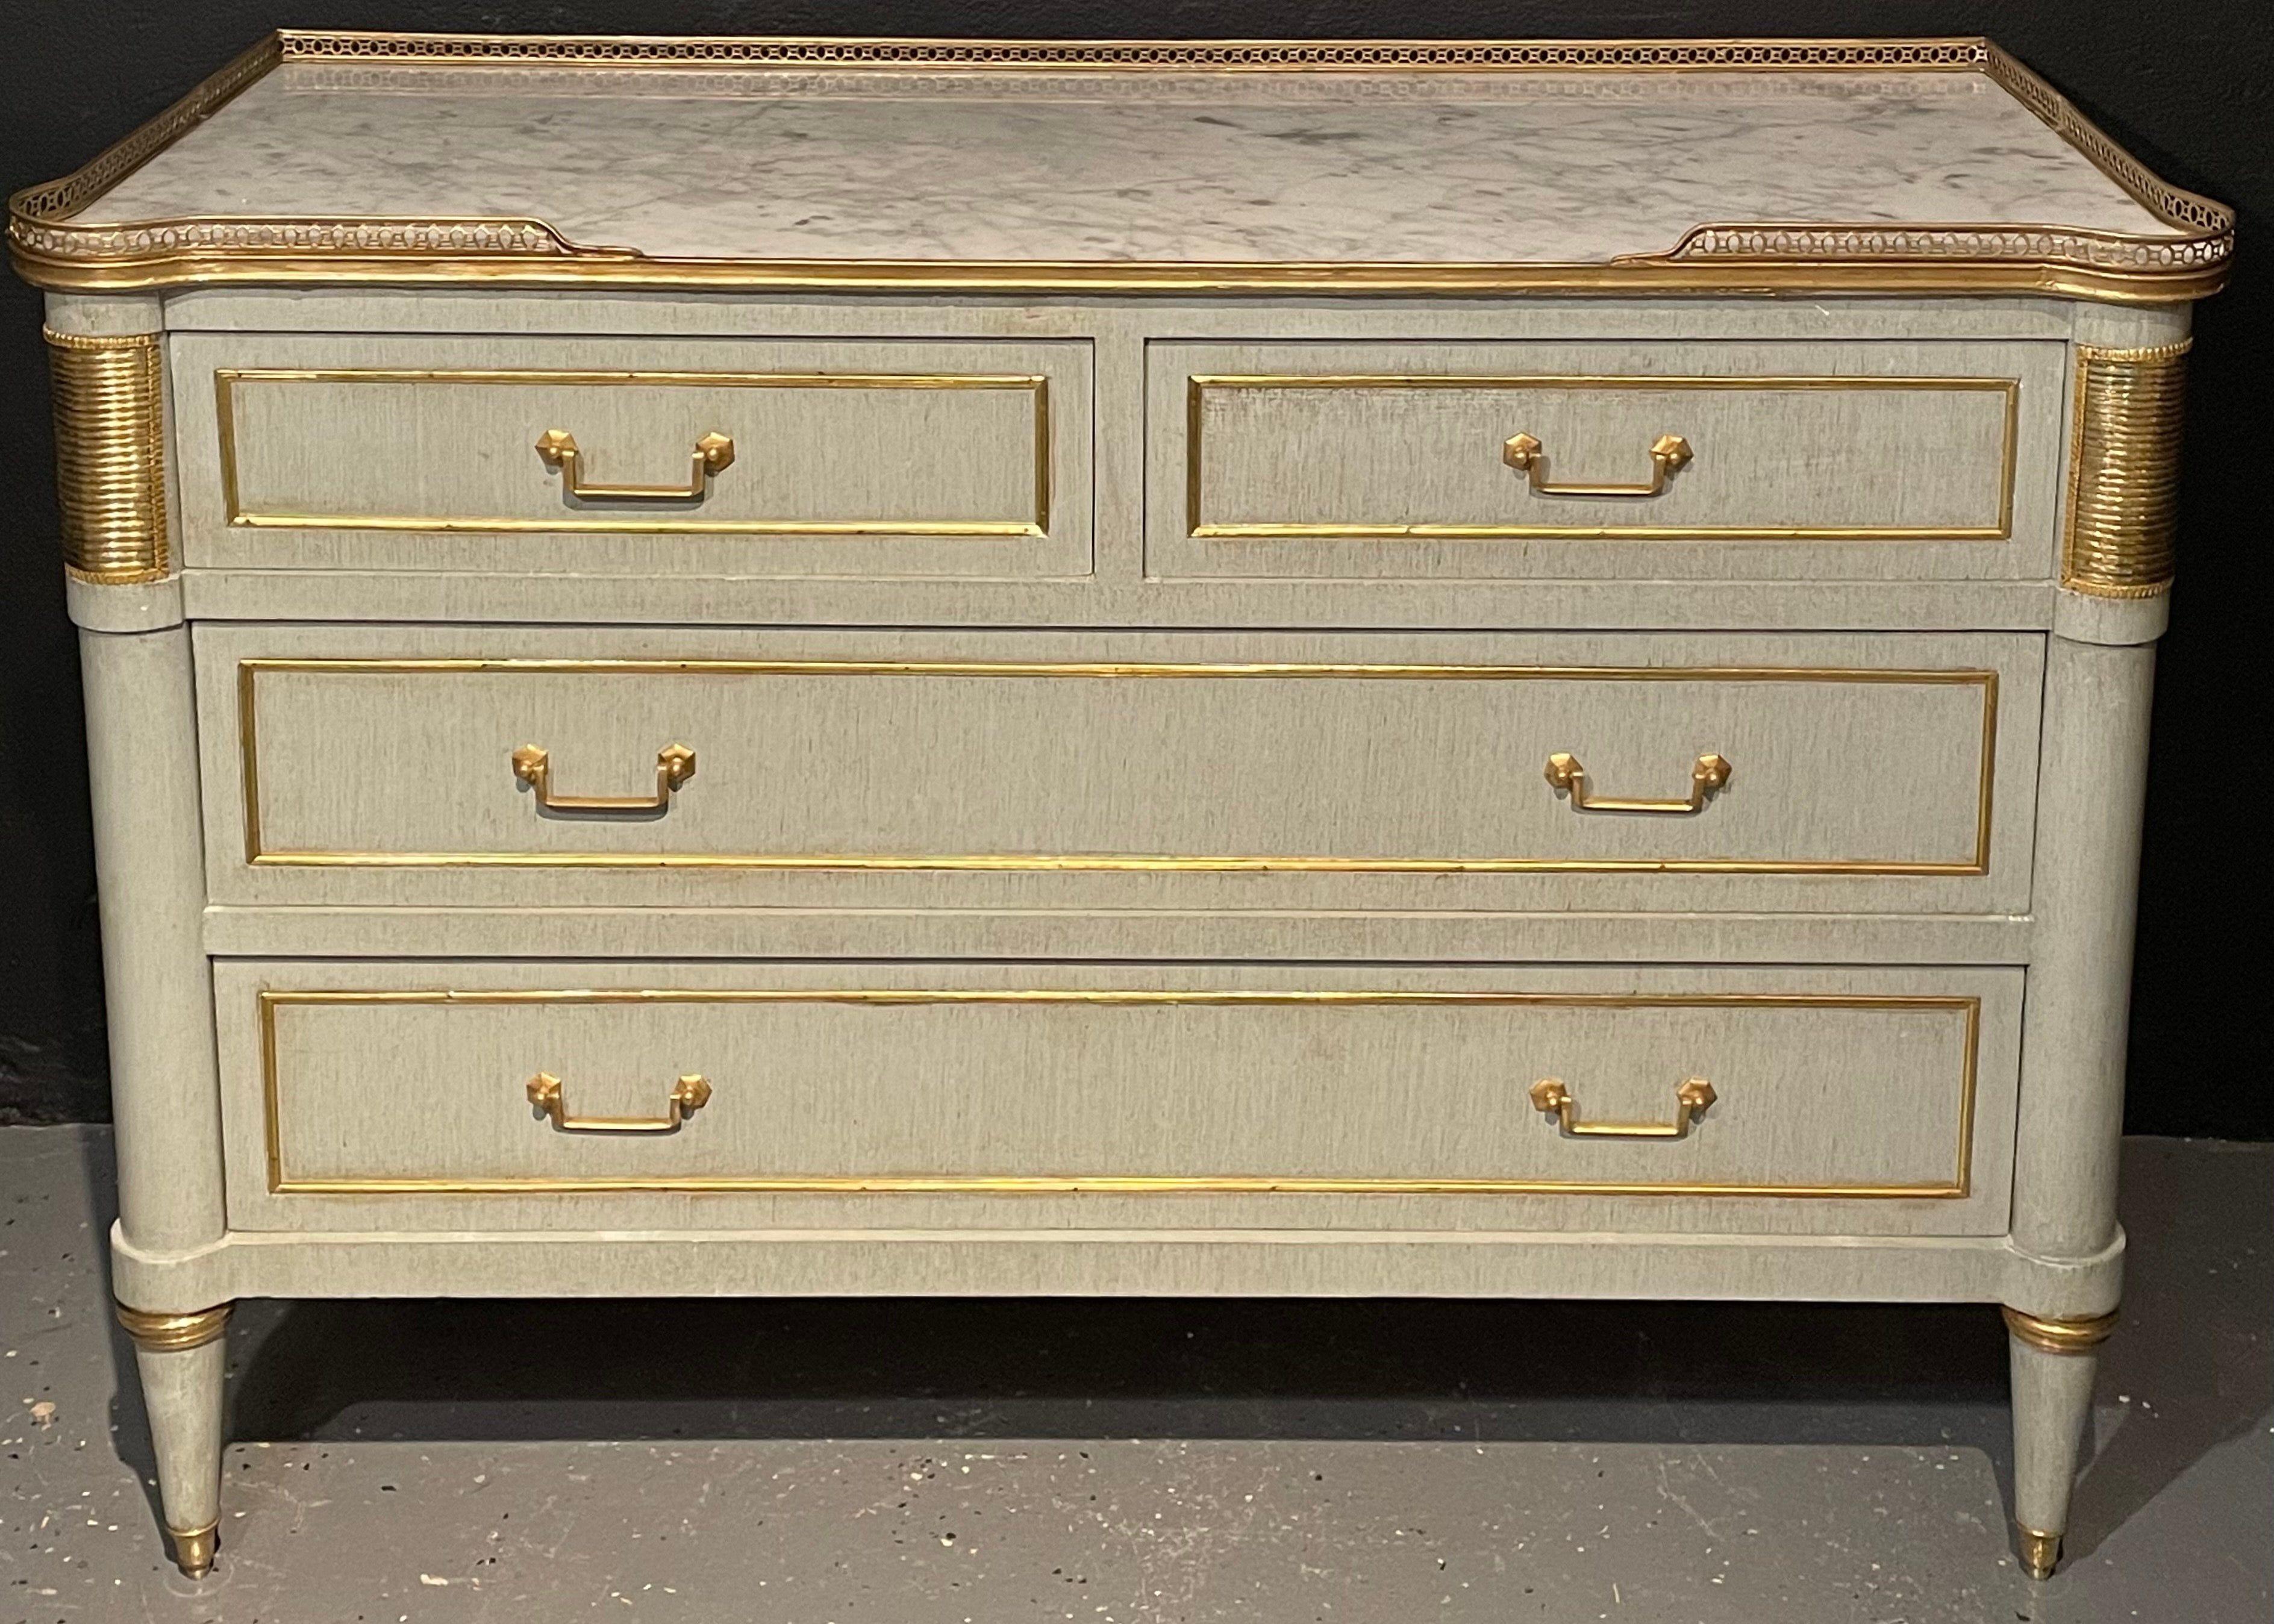 20th Century Pair of Commodes, Nightstands in Decorator Faux Linen Gray Paint Jansen Style